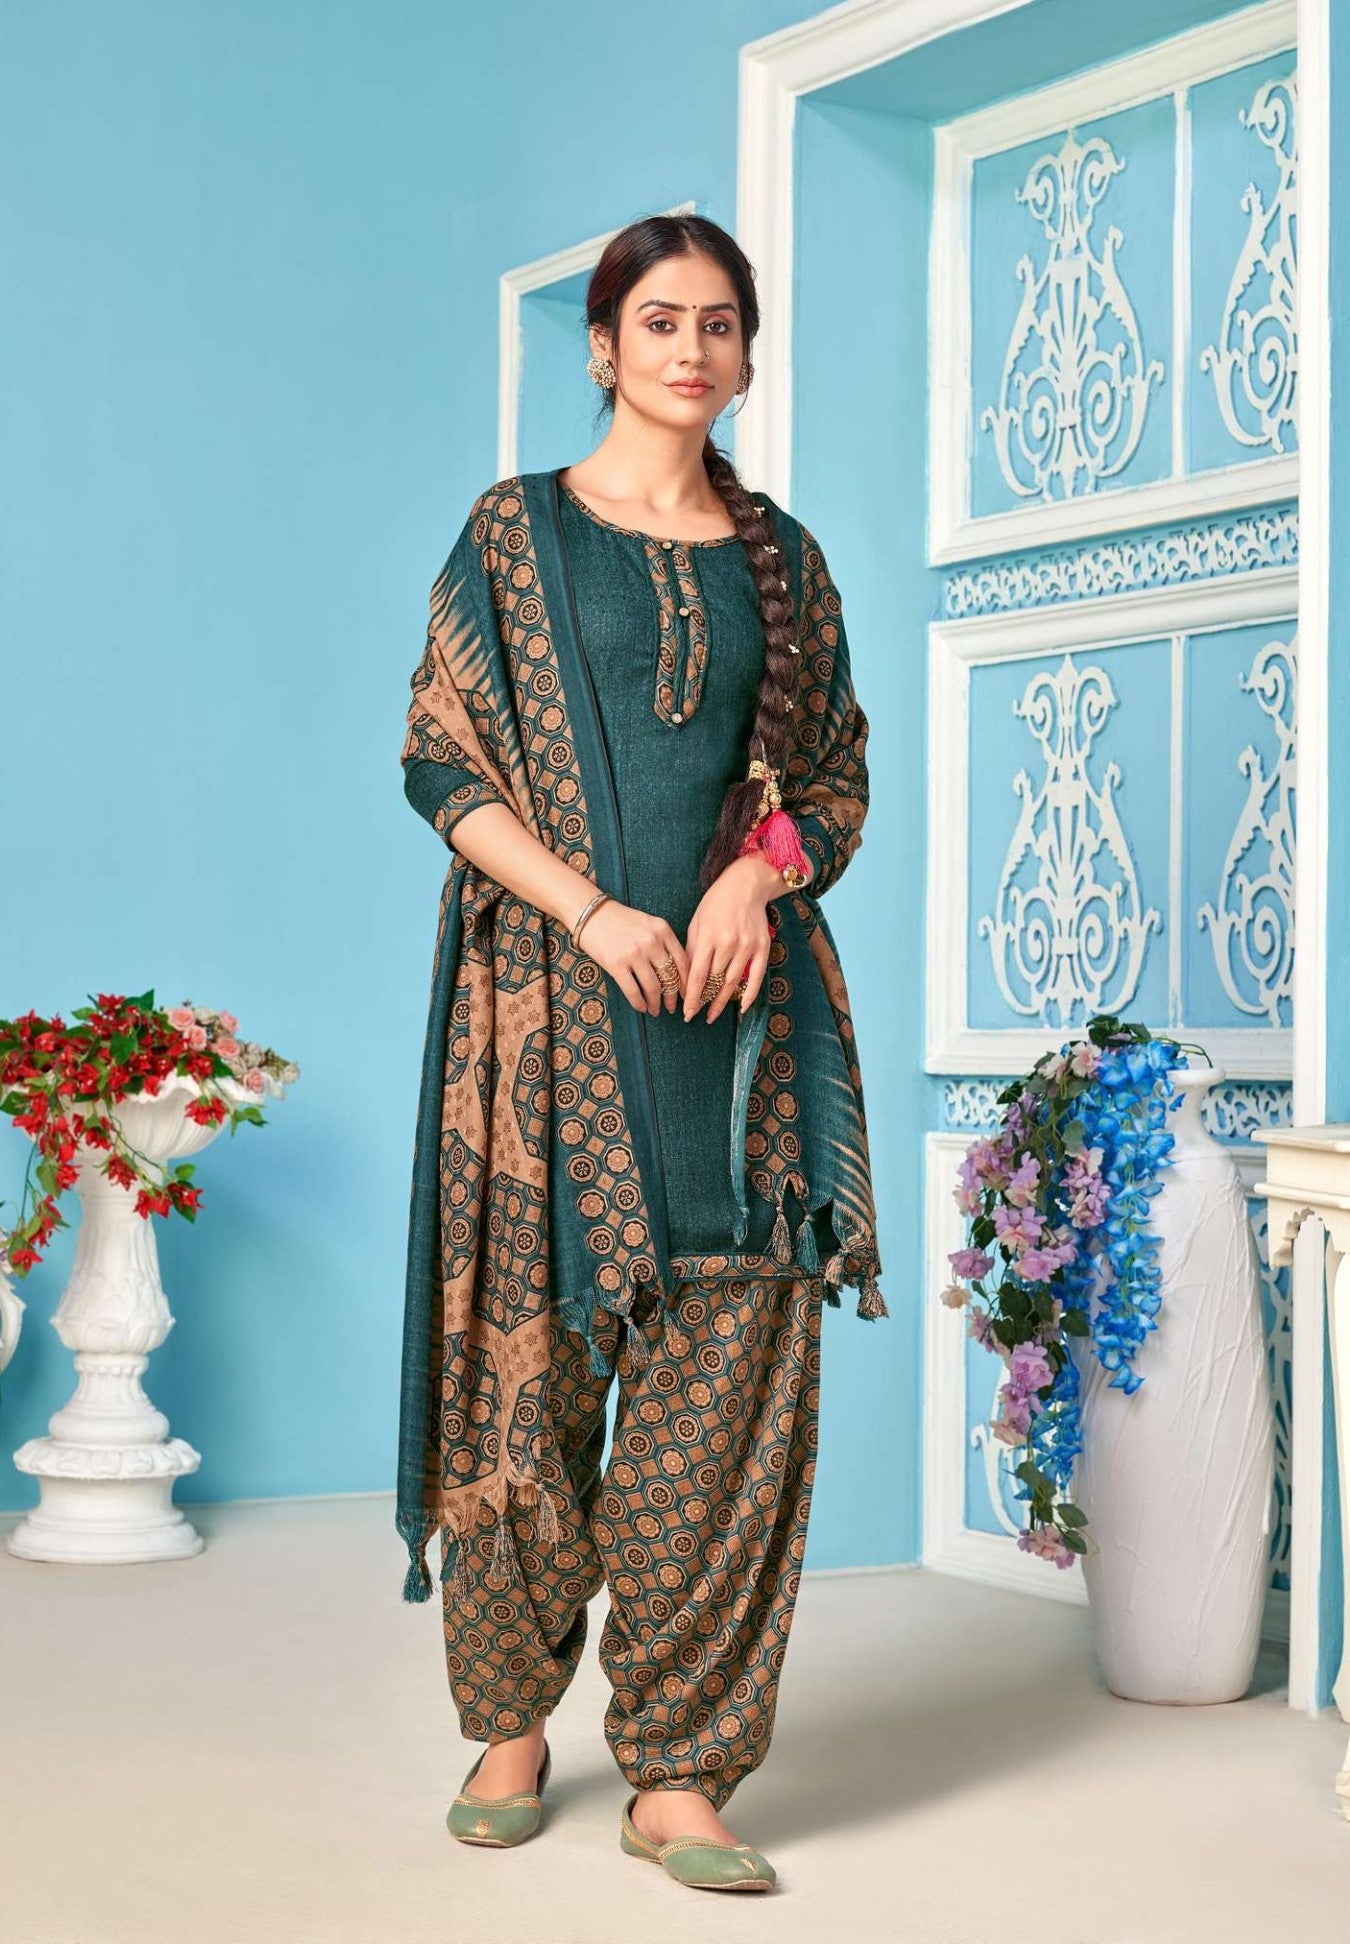 online image of woman wearing salwar suit from suit wholesale market